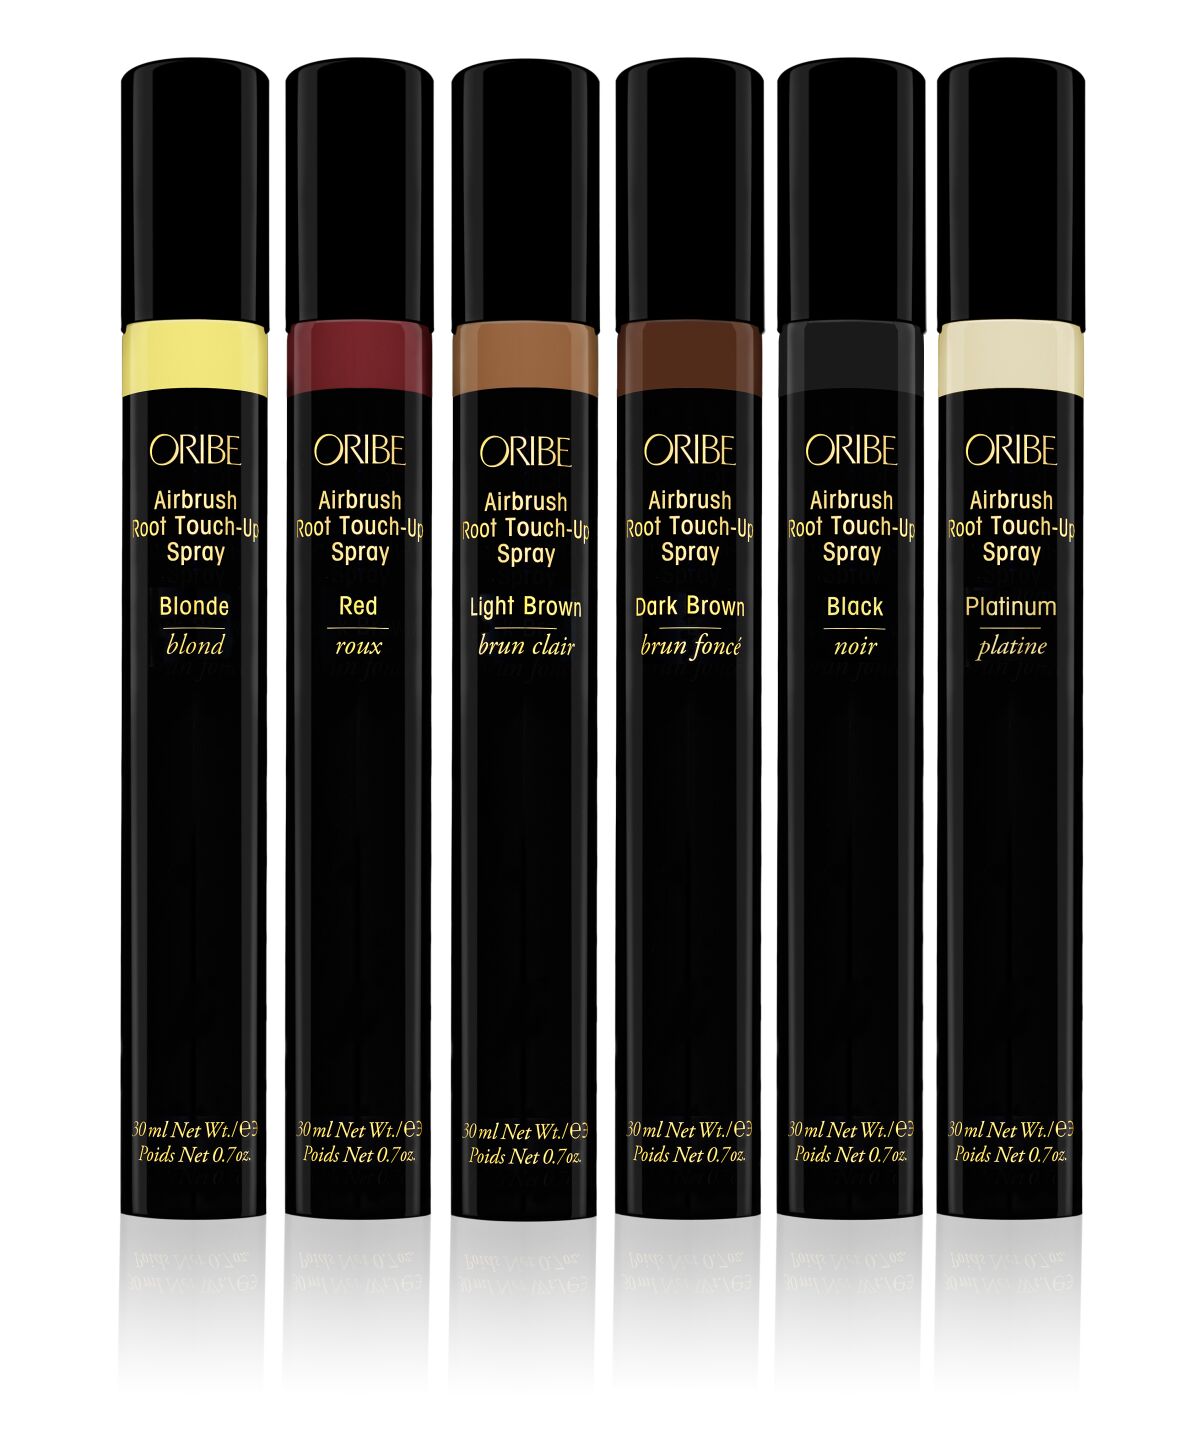 Oribe Airbrush Root Touch-Up Spray, $32 in six shades.